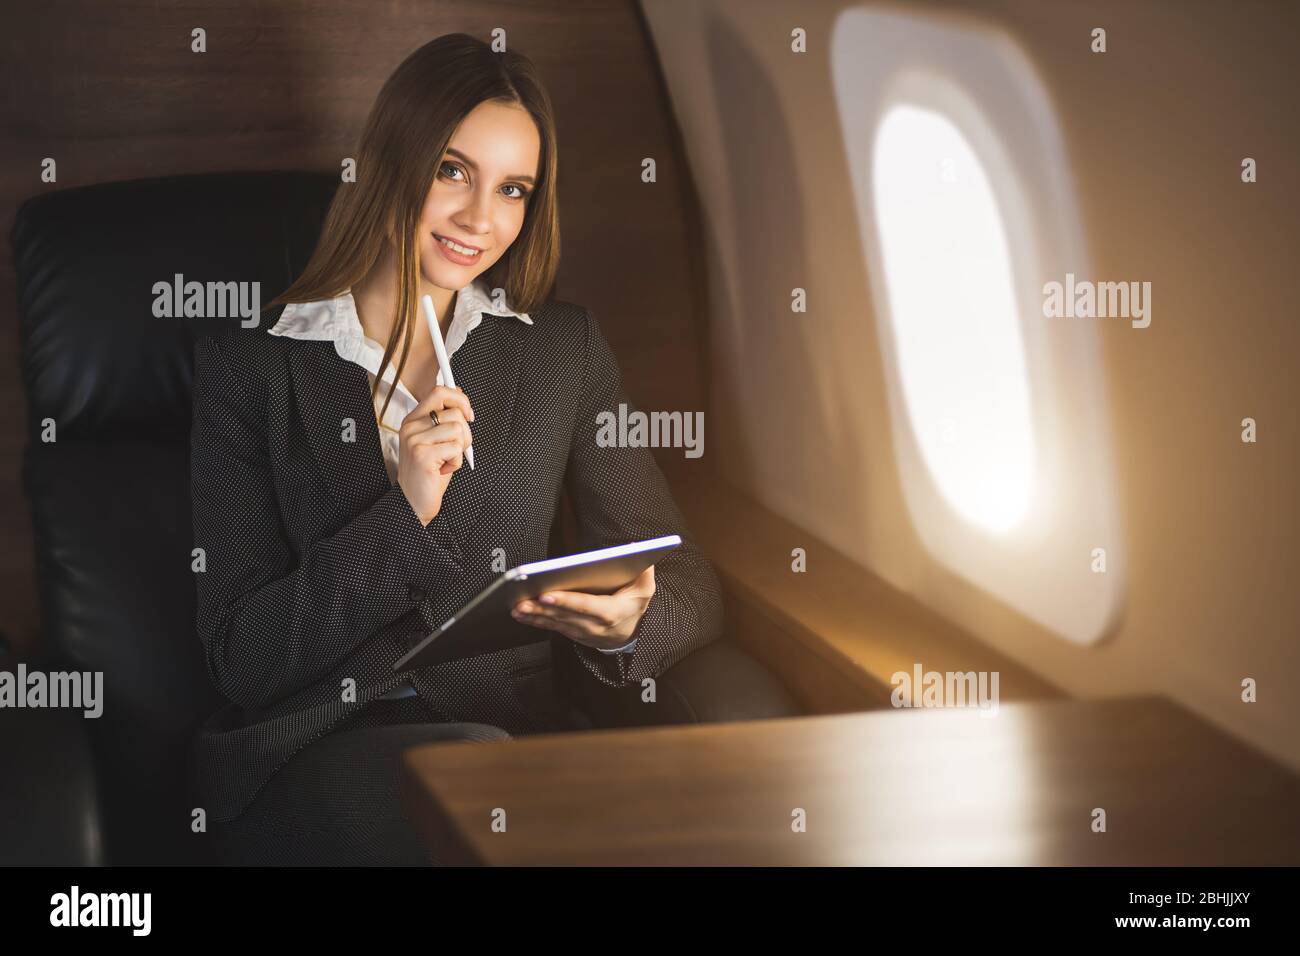 Happy brown haired young caucasian businesswoman holding tablet, sitting on seat in private jet, looking at airplane window and smiling. Stock Photo